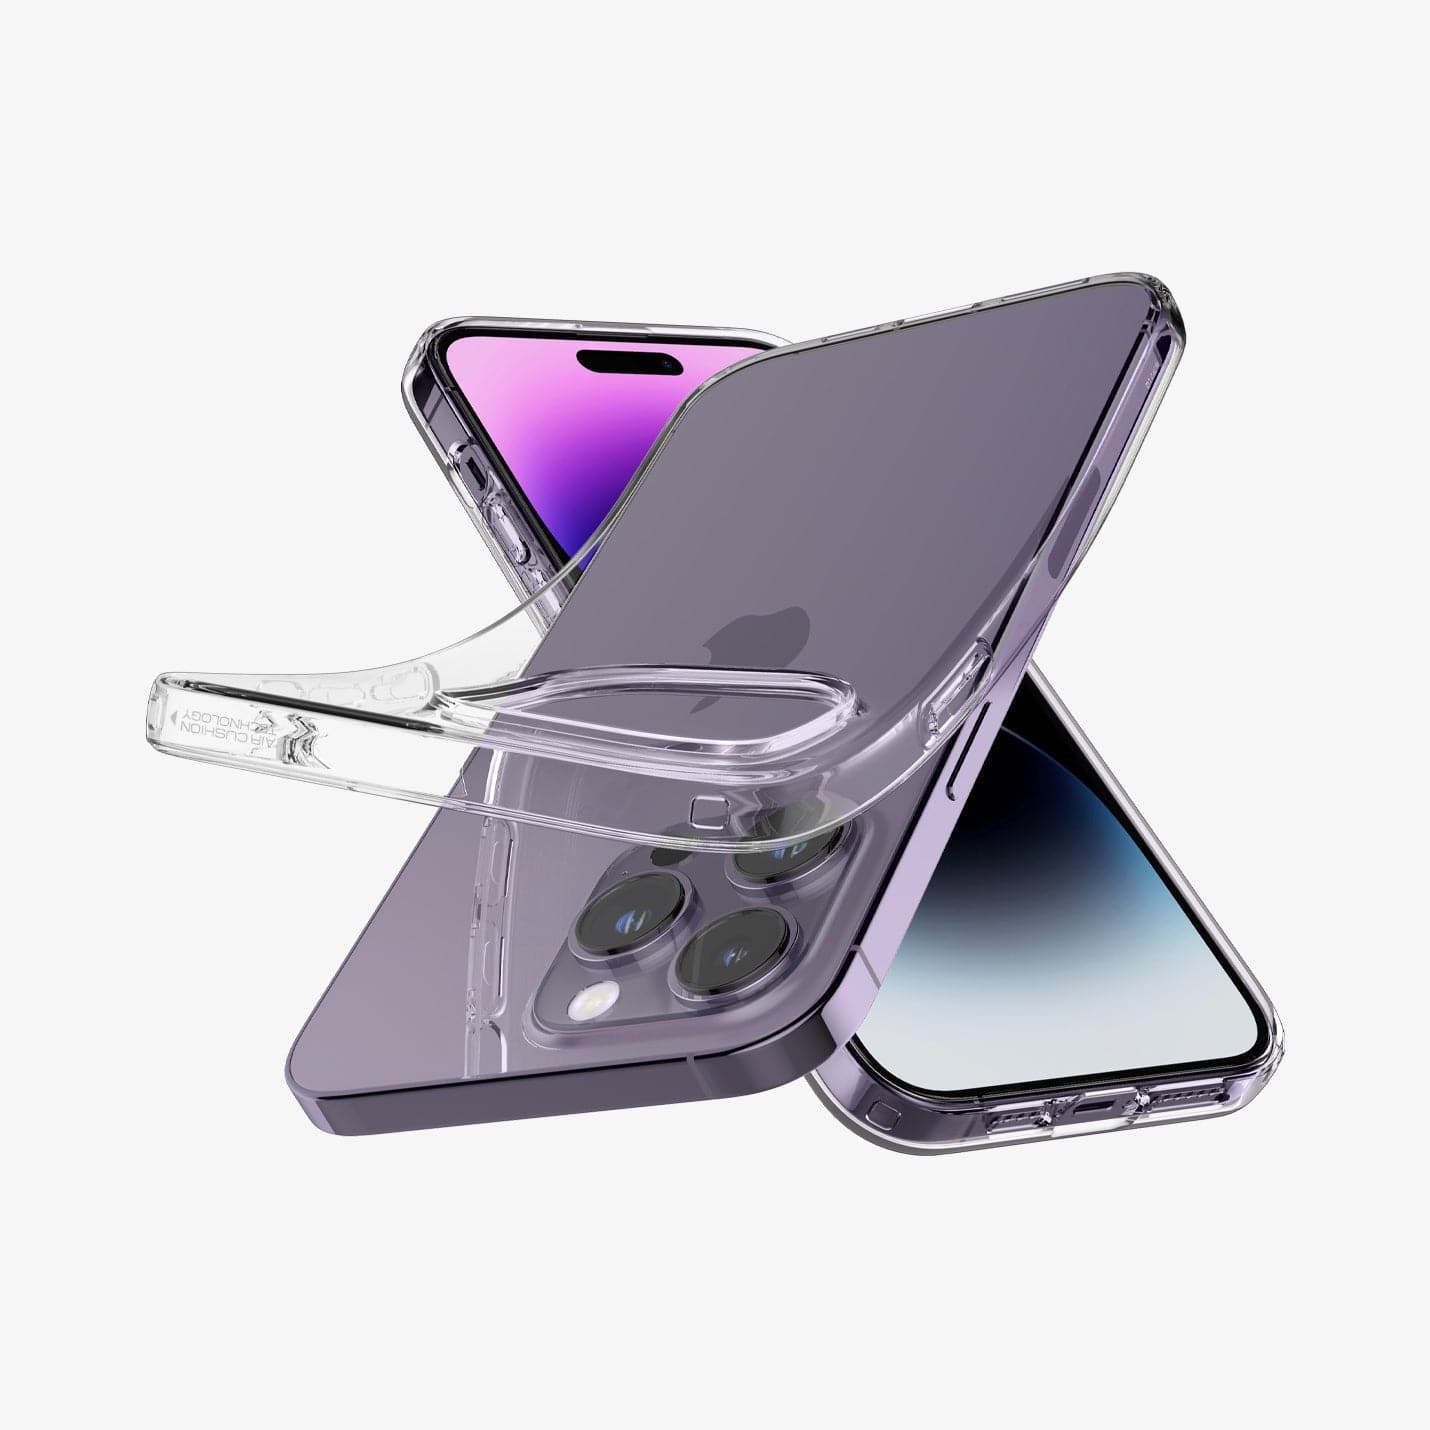 ACS04809 - iPhone 14 Pro Max Case Liquid Crystal in crystal clear showing the back bending slightly away from device to show the flexibility upside down view